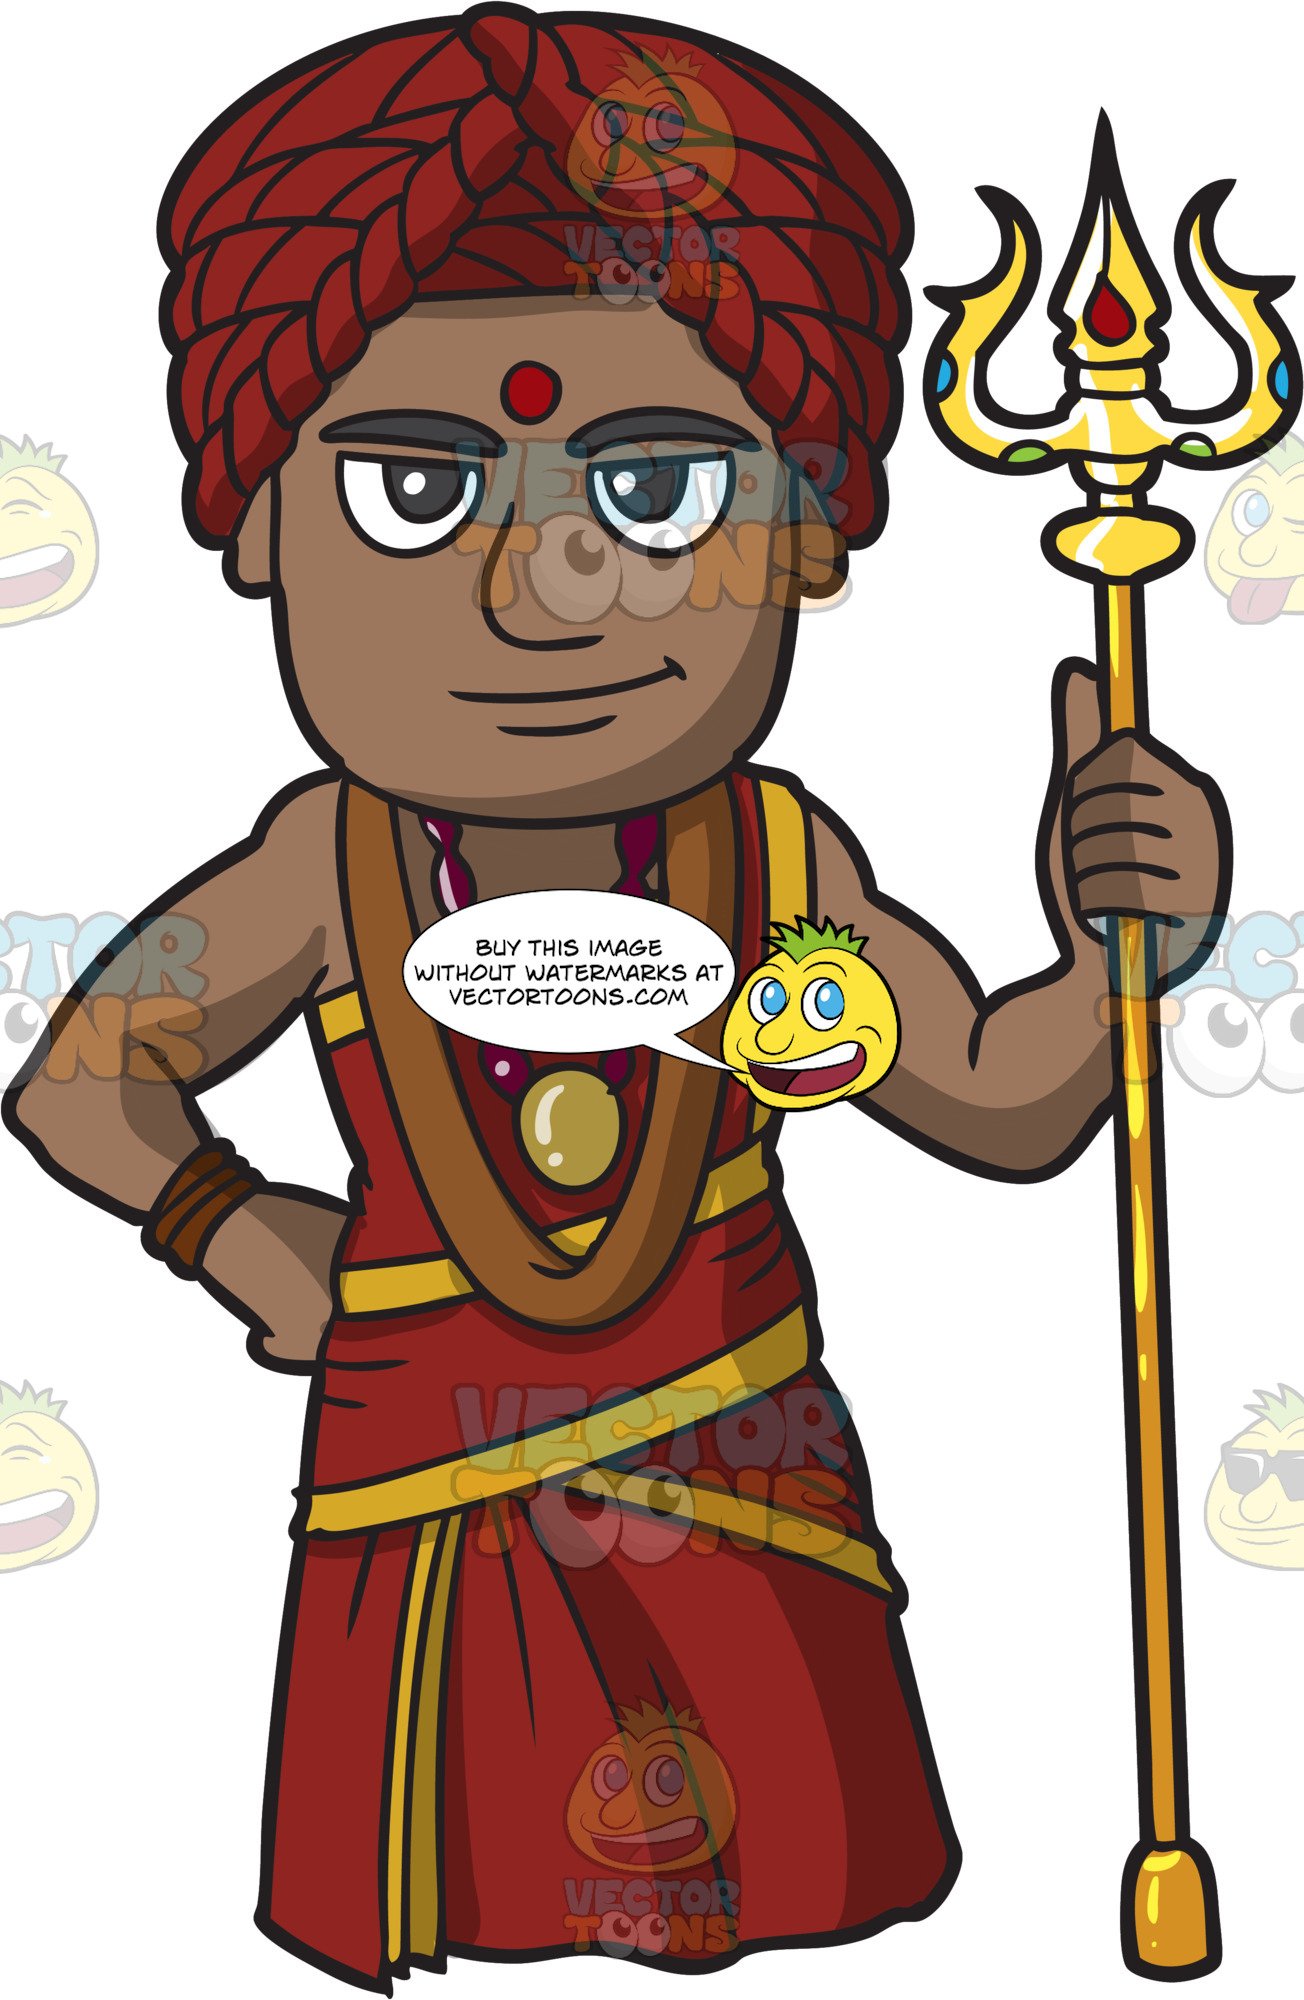 king clipart king indian